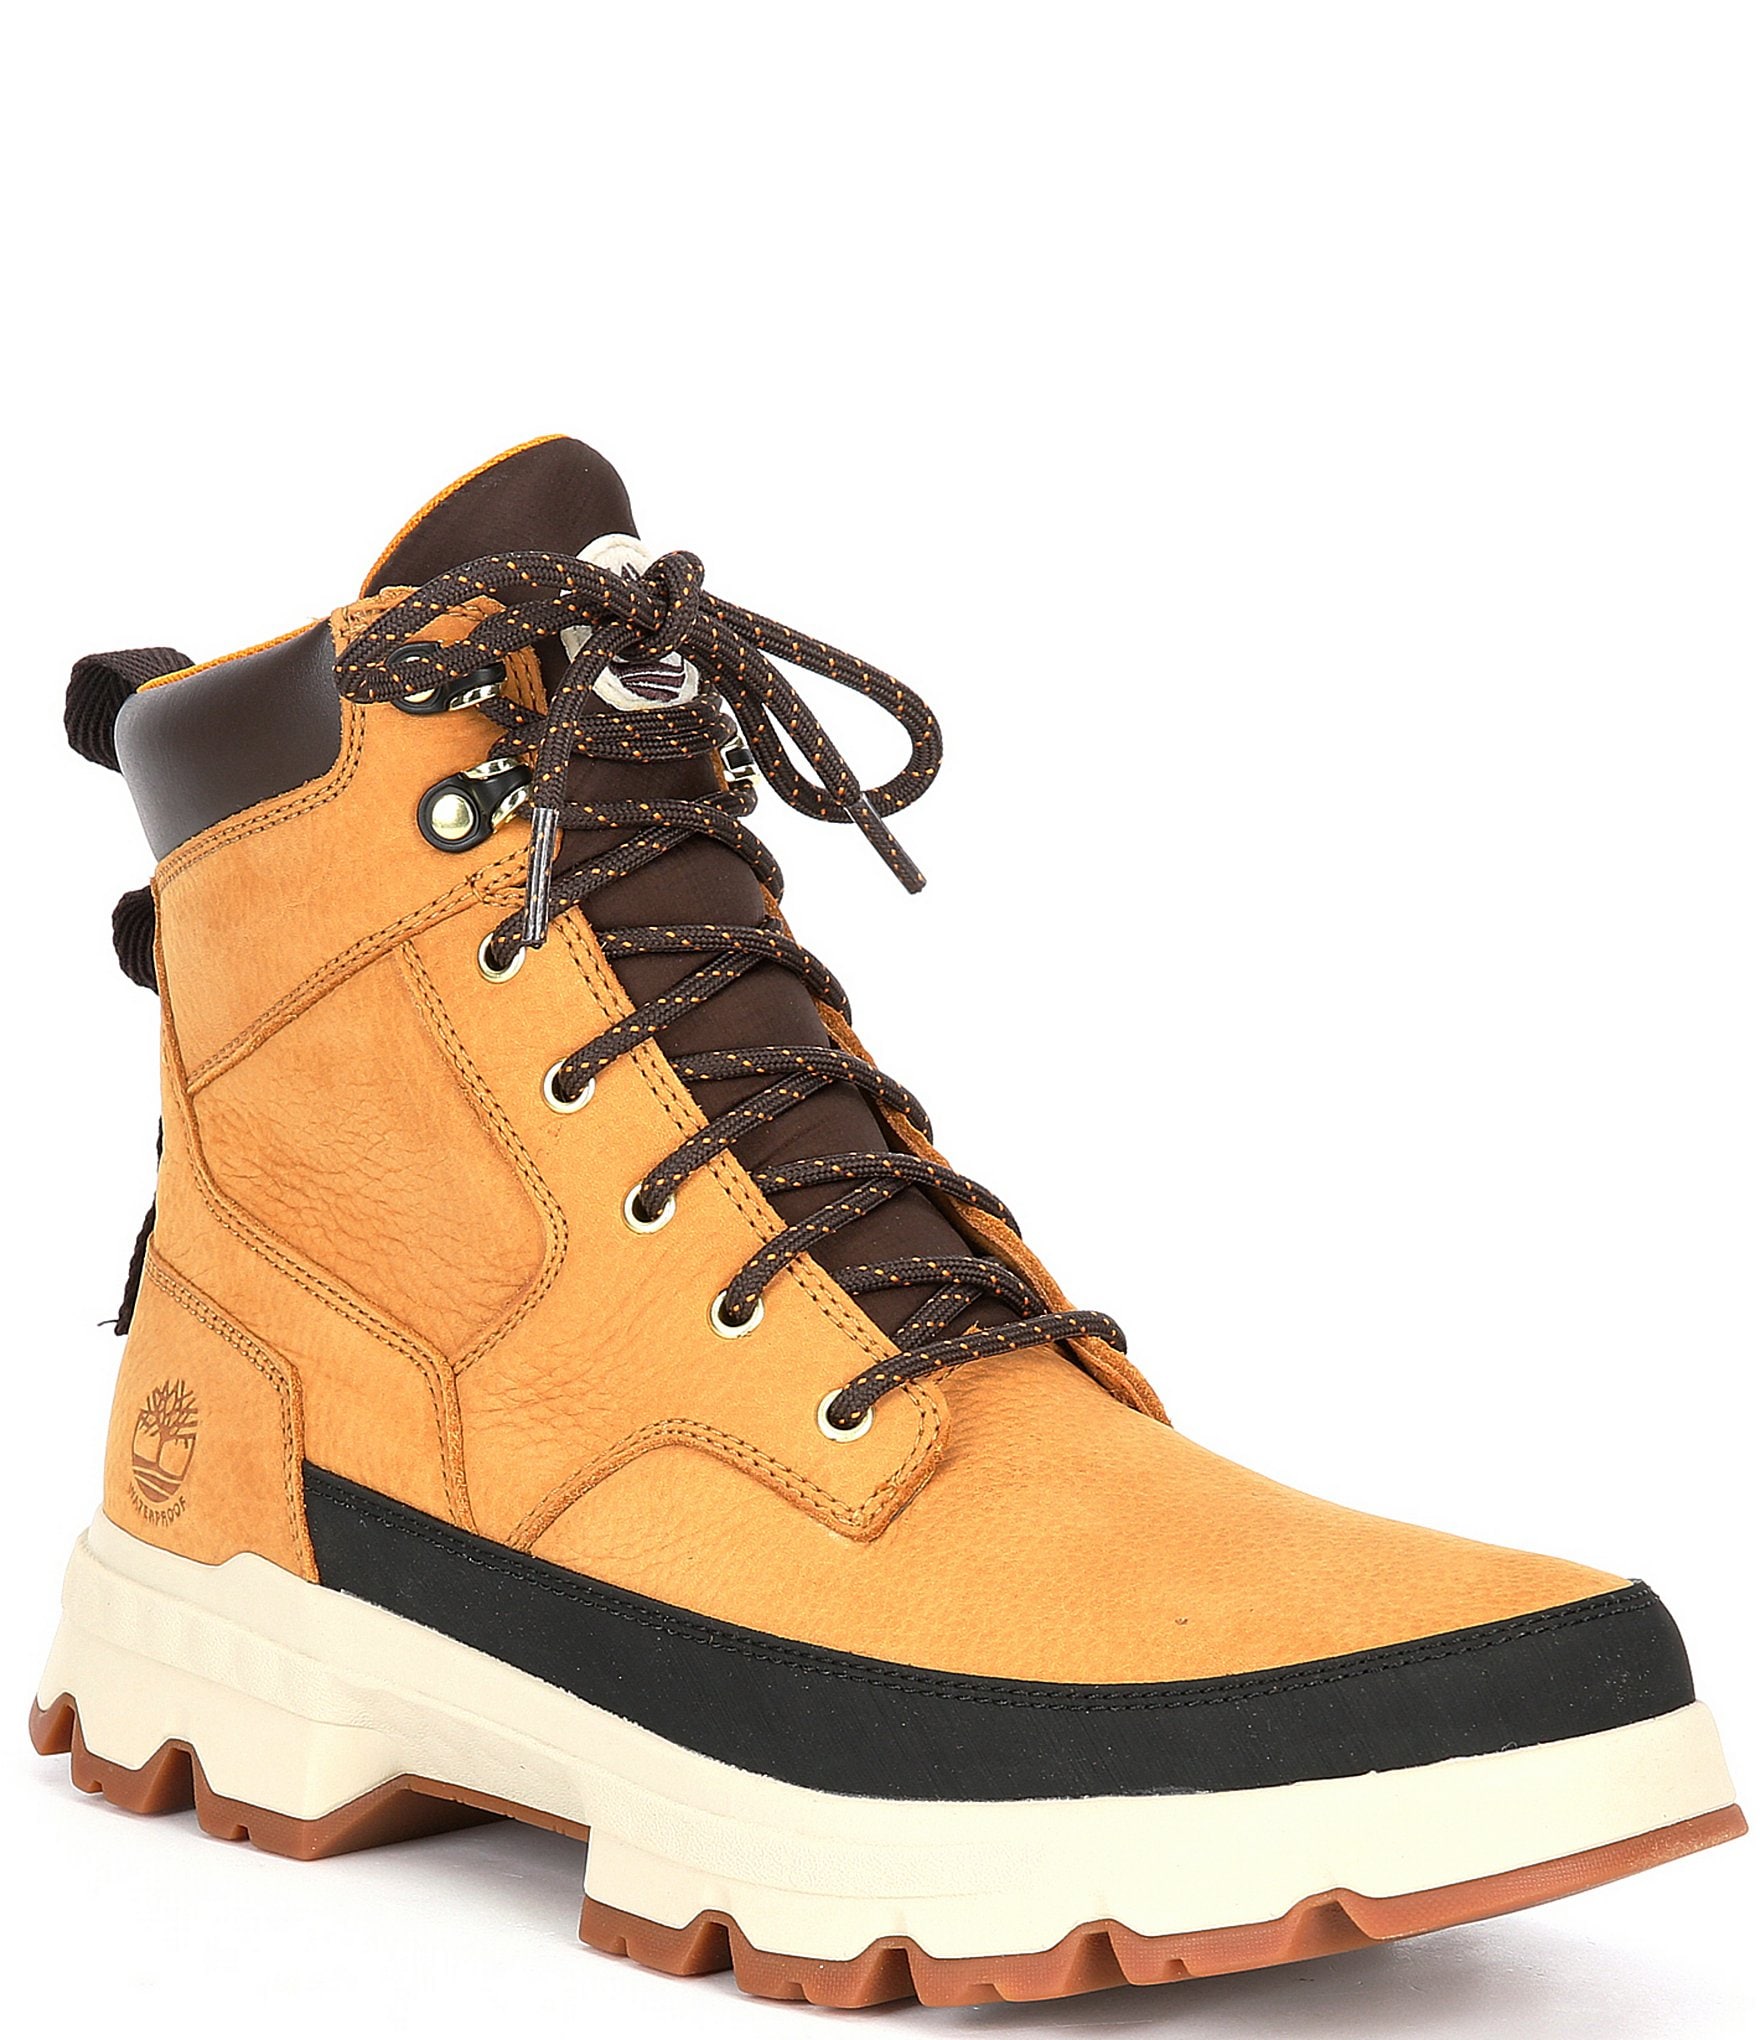 Timberland Men's TBL Originals Ultra Waterproof Lace-Up Cold Weather Boots Dillard's